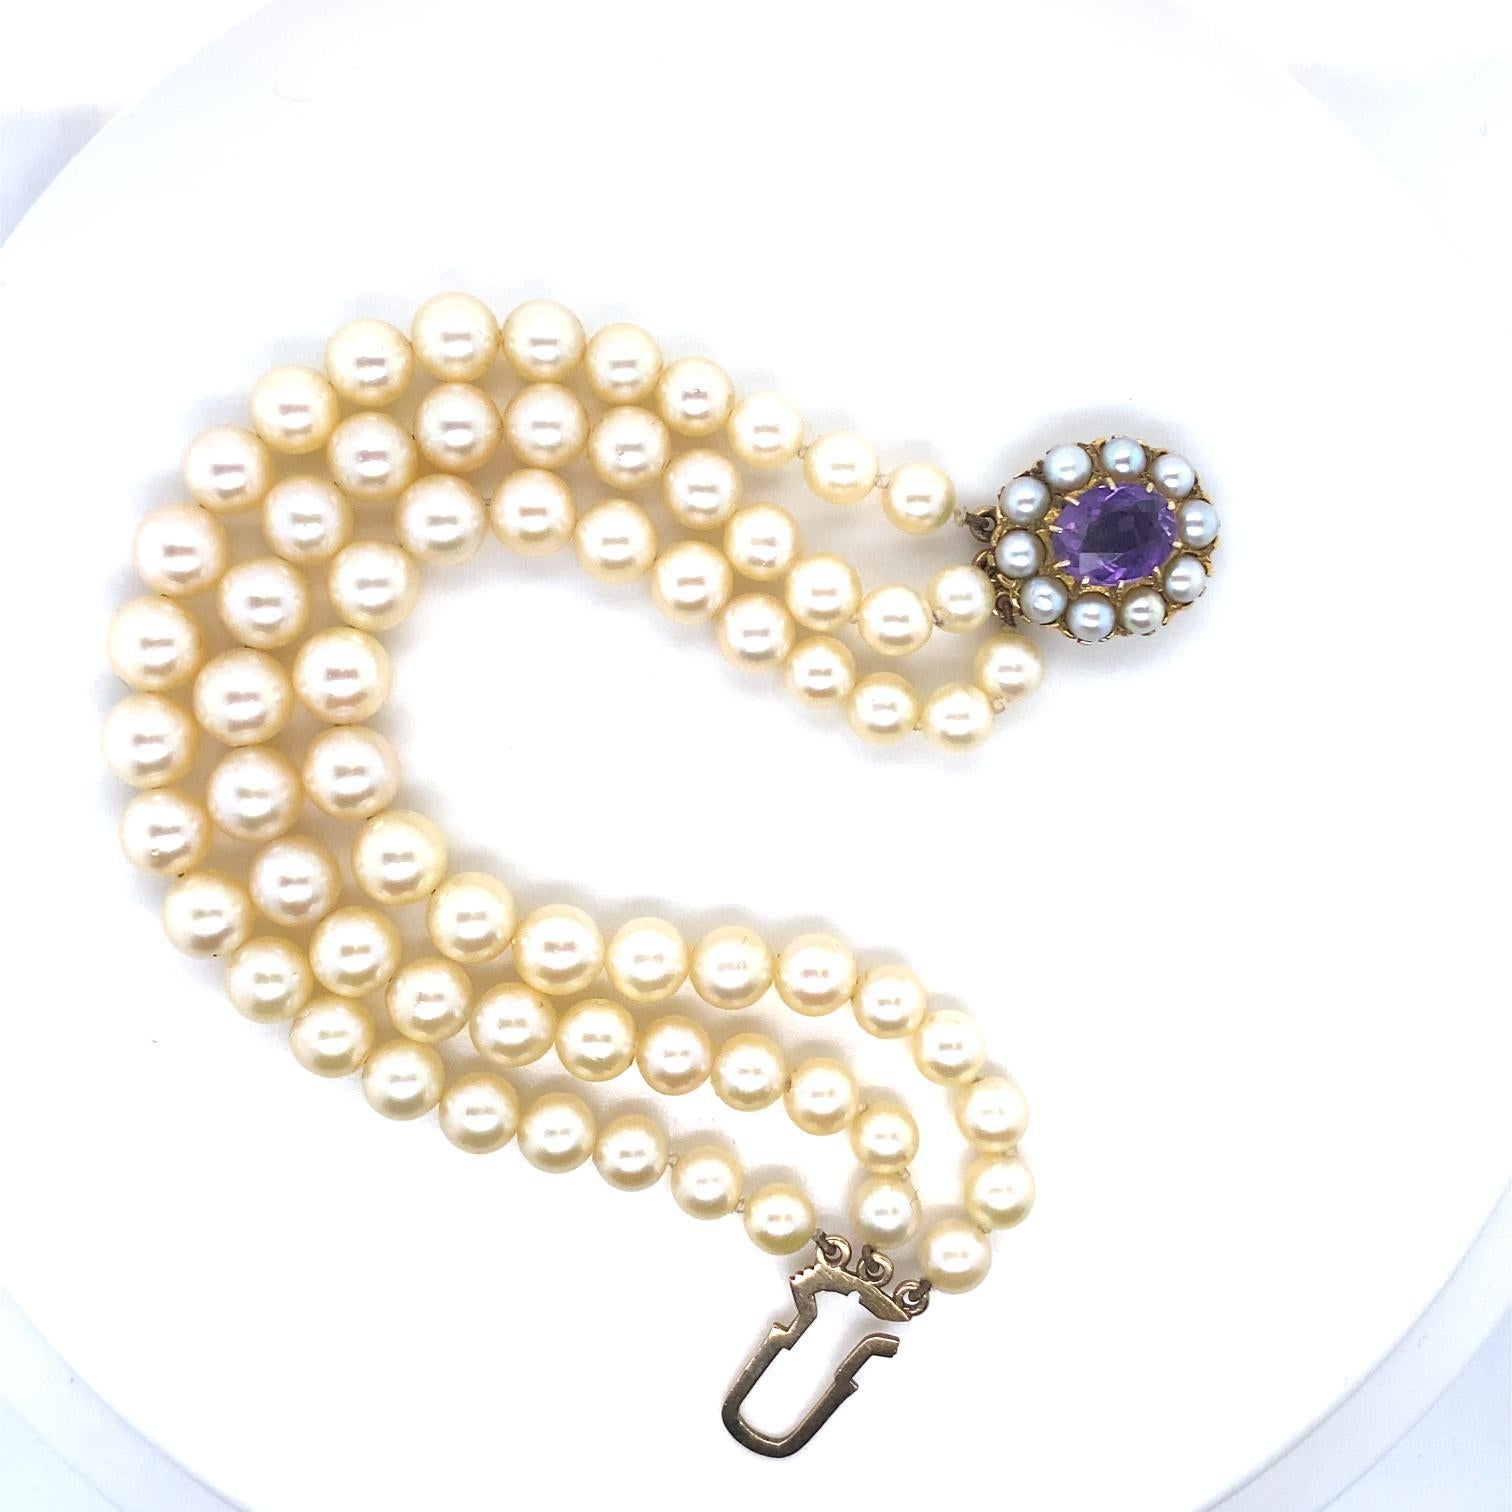 A vintage 3 row pearl and amethyst 9 karat yellow gold bracelet. Circa 1960

Designed as an elegant three row bracelet, each of the rows comprises of double knotted cultured pearls graduating in size from 5.5mm to 8mm approximately.

Finished with